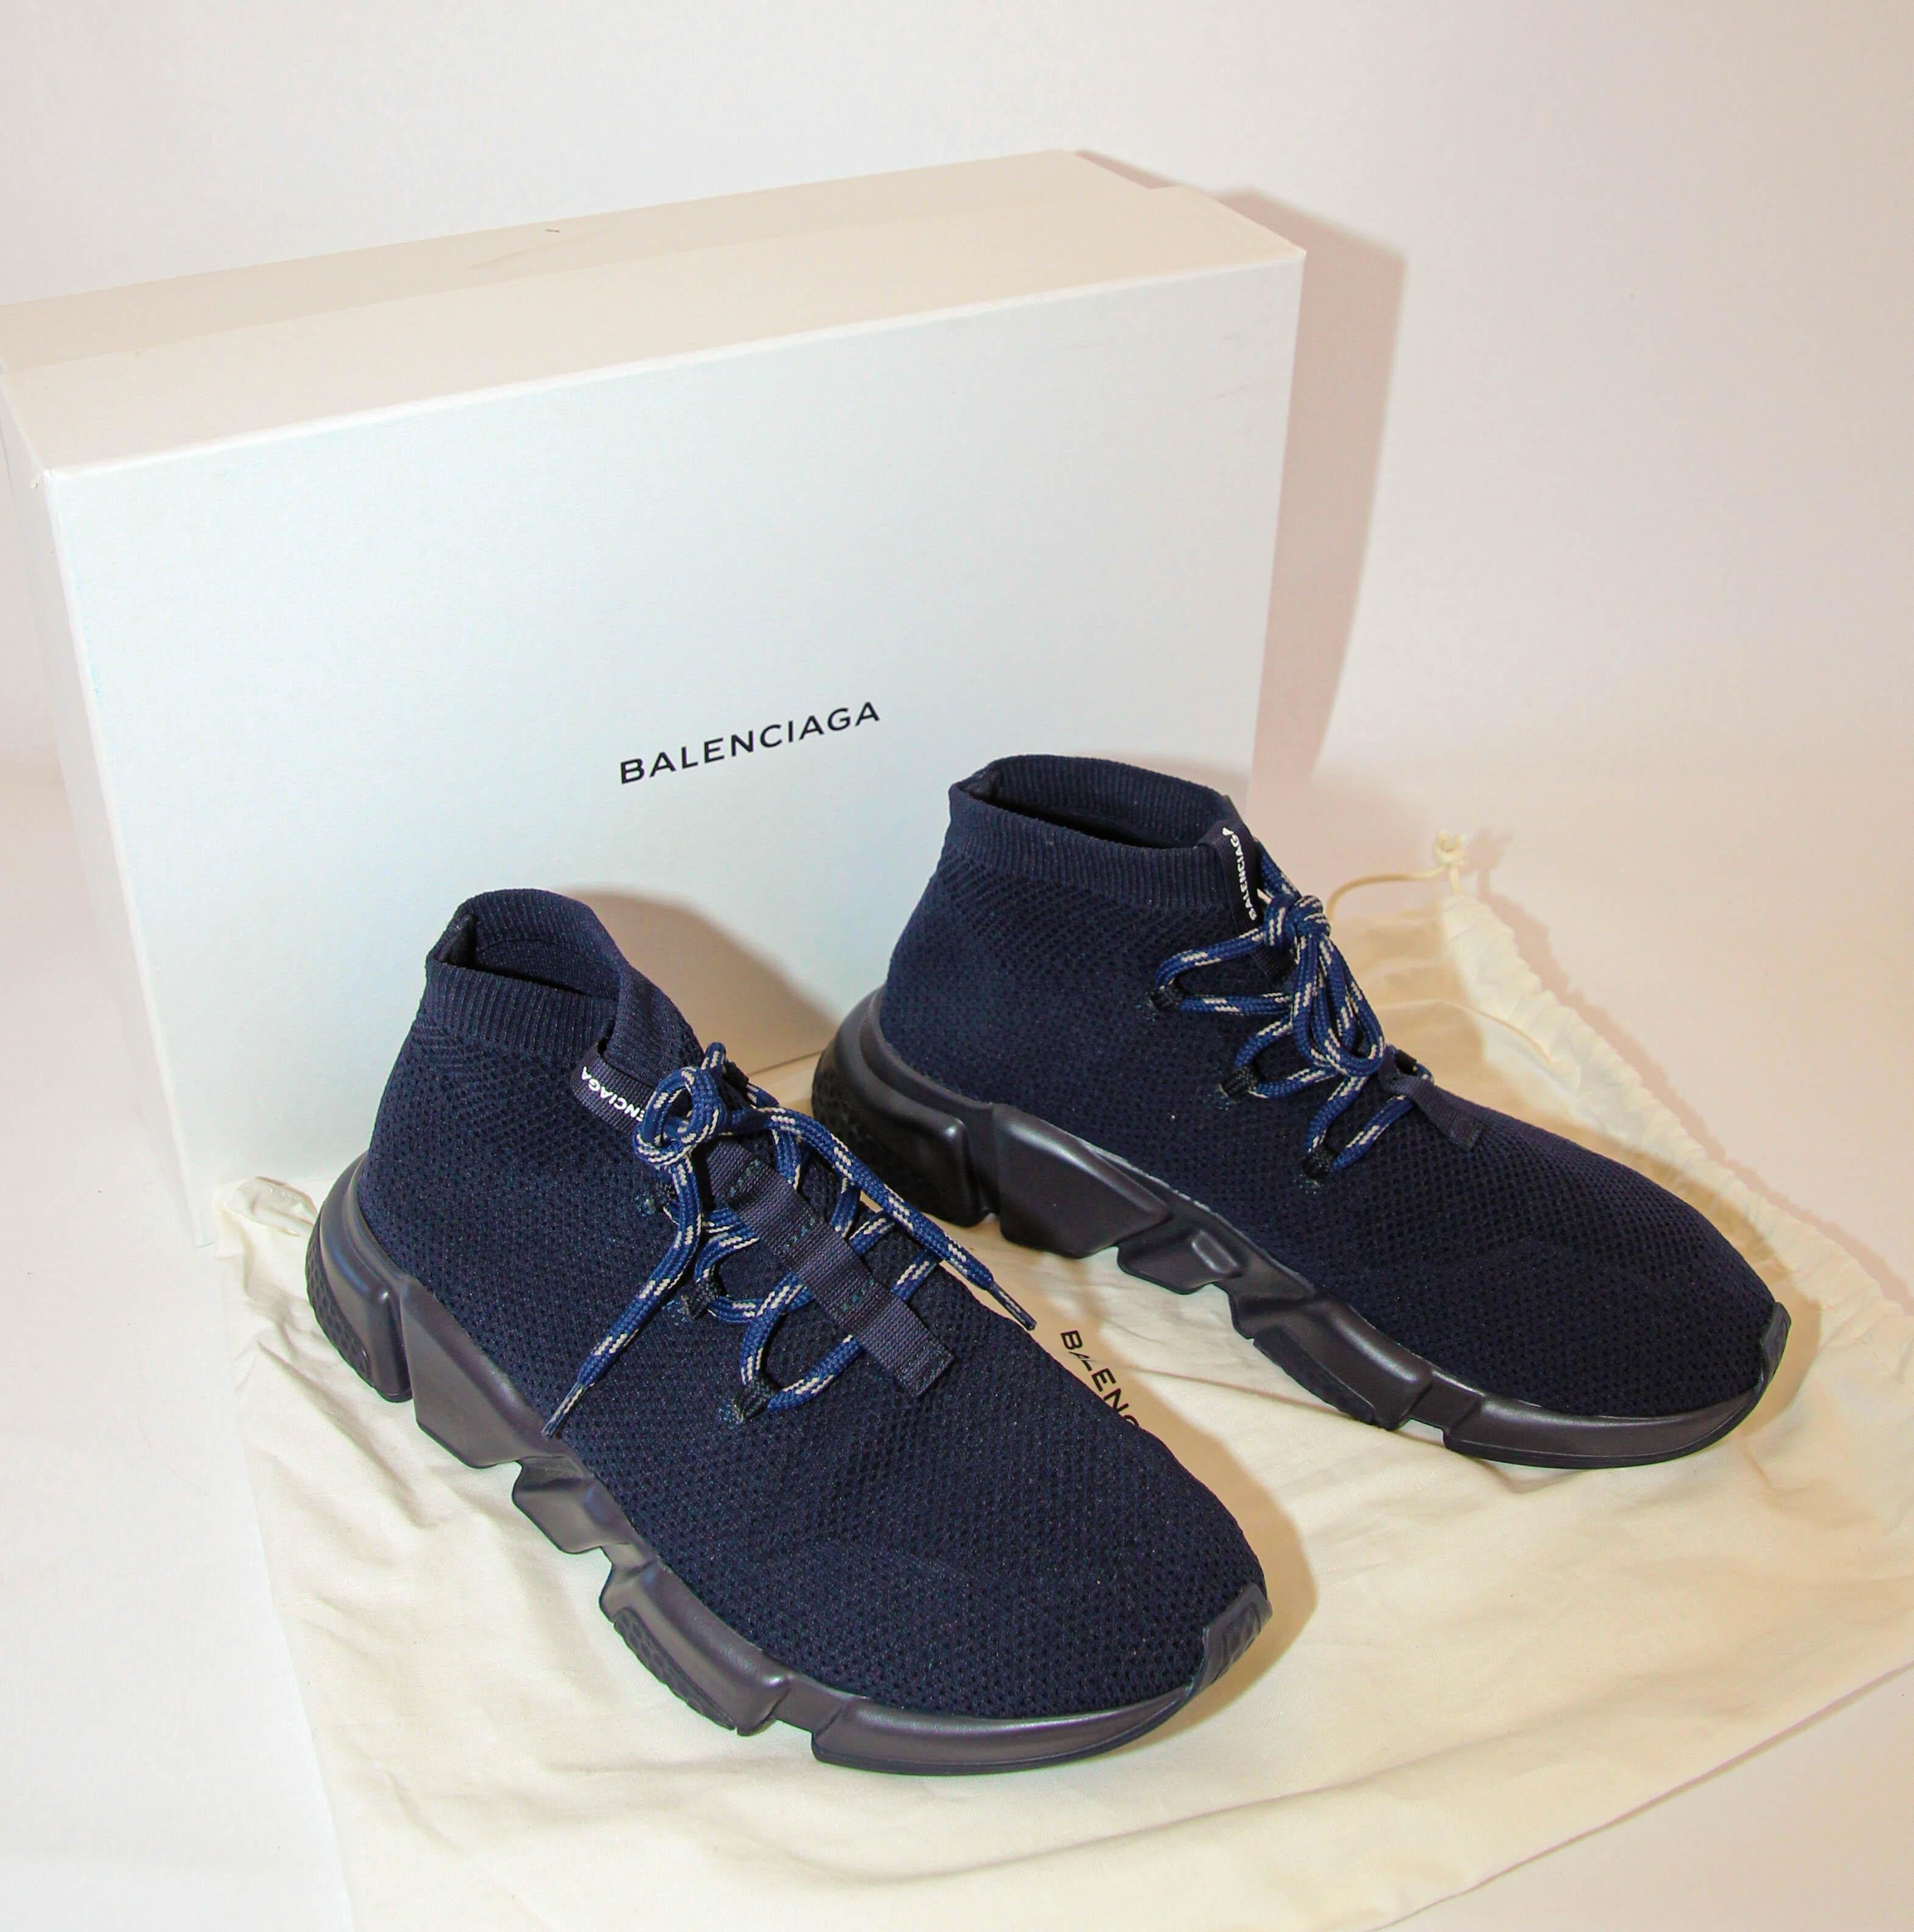 Completely unworn Balenciaga Speed Lace up men's sneakers in dark blue.
Balenciaga 100% Auth Men's Blue Navy Sock Sneakers w Laces new with tag and box Size 42 EU 8.5 US.
Balenciaga, Men, Balenciaga Shoes, Shoes
Balenciaga Men's Speed Mesh